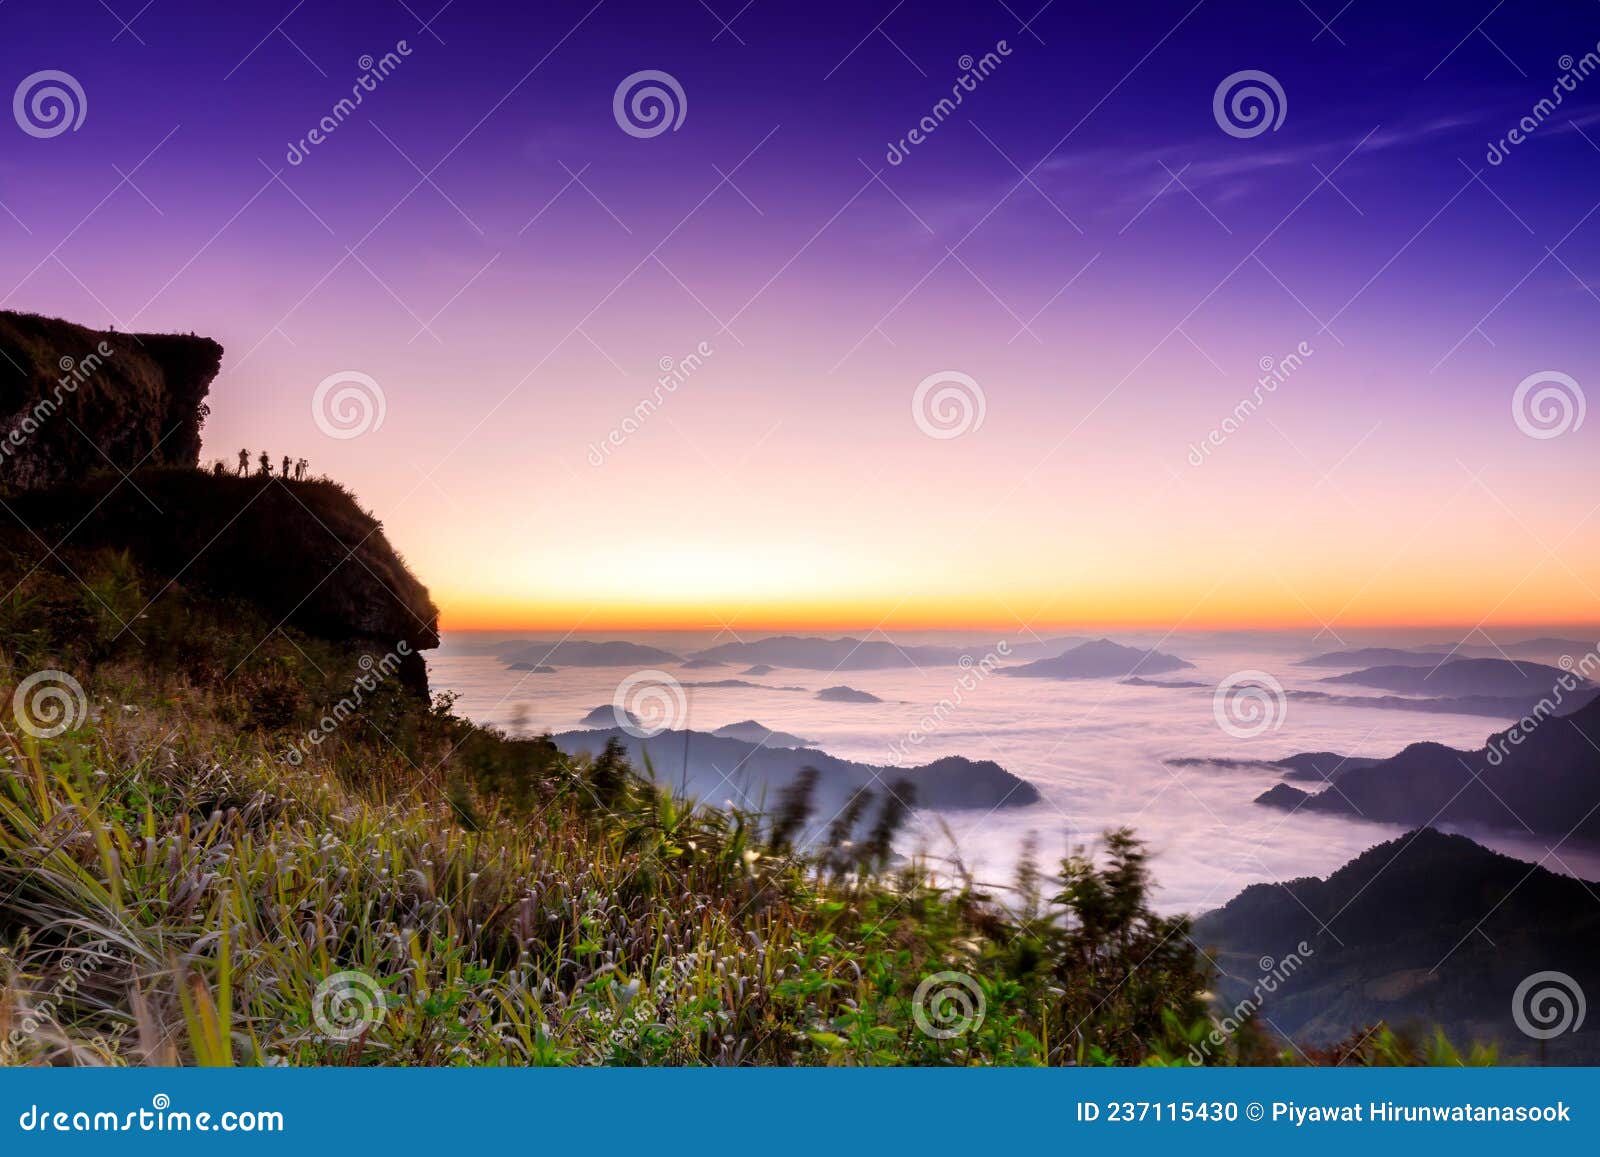 starlight sunrise scene with the peak of mountain called phu chifa with fog over the city below